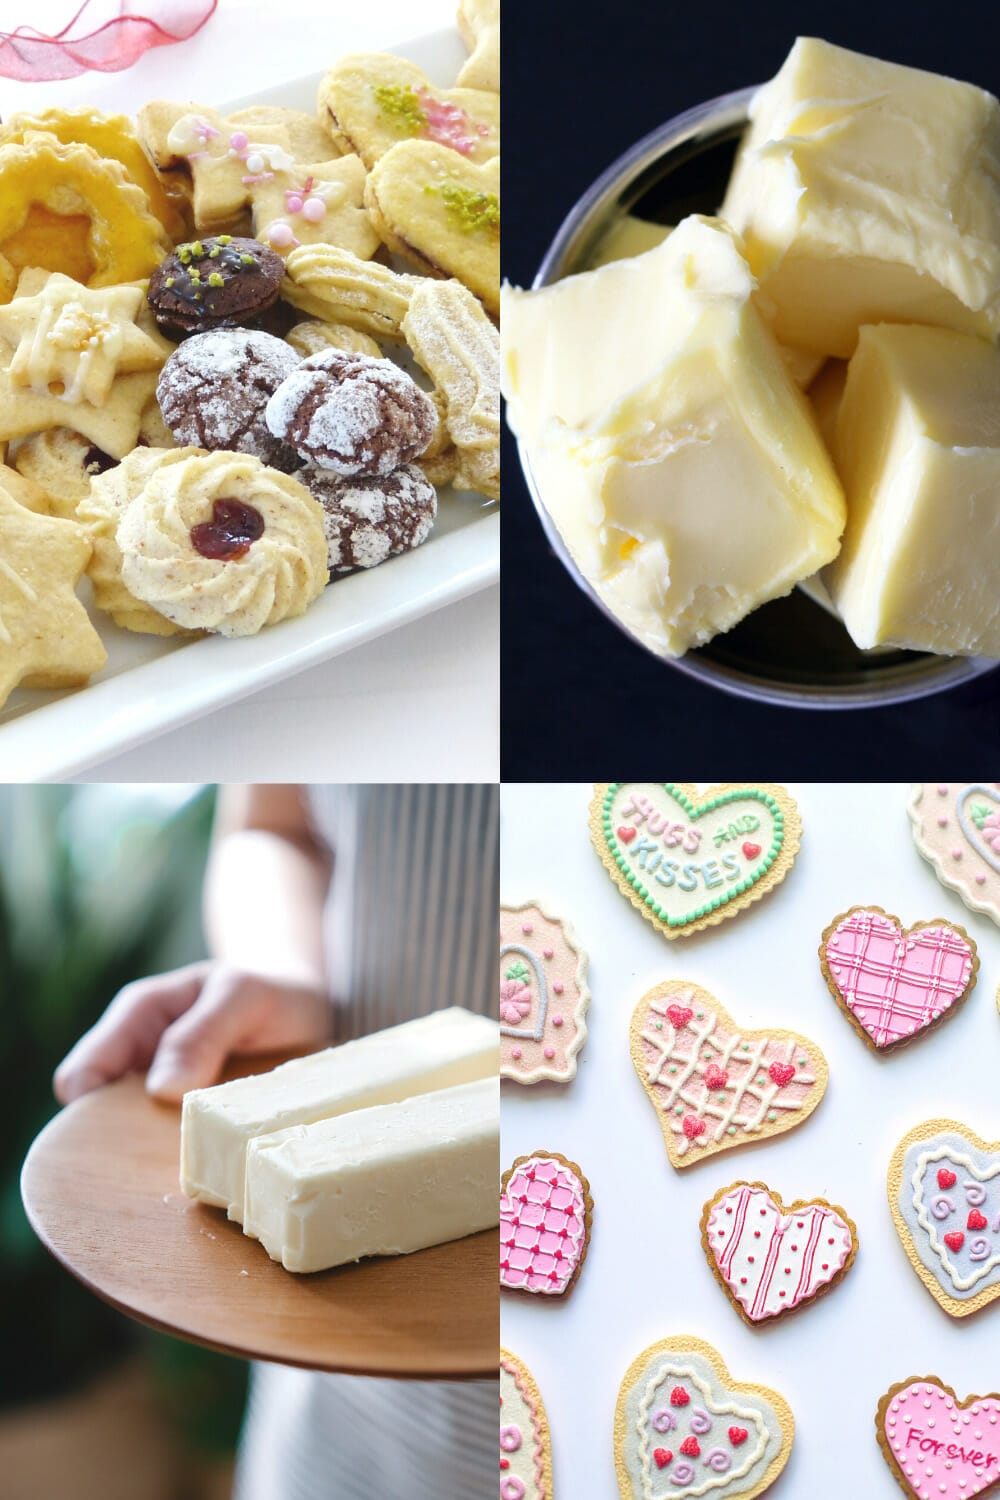 Help! Out of butter: how to make cookies without butter via @nofusskitchen